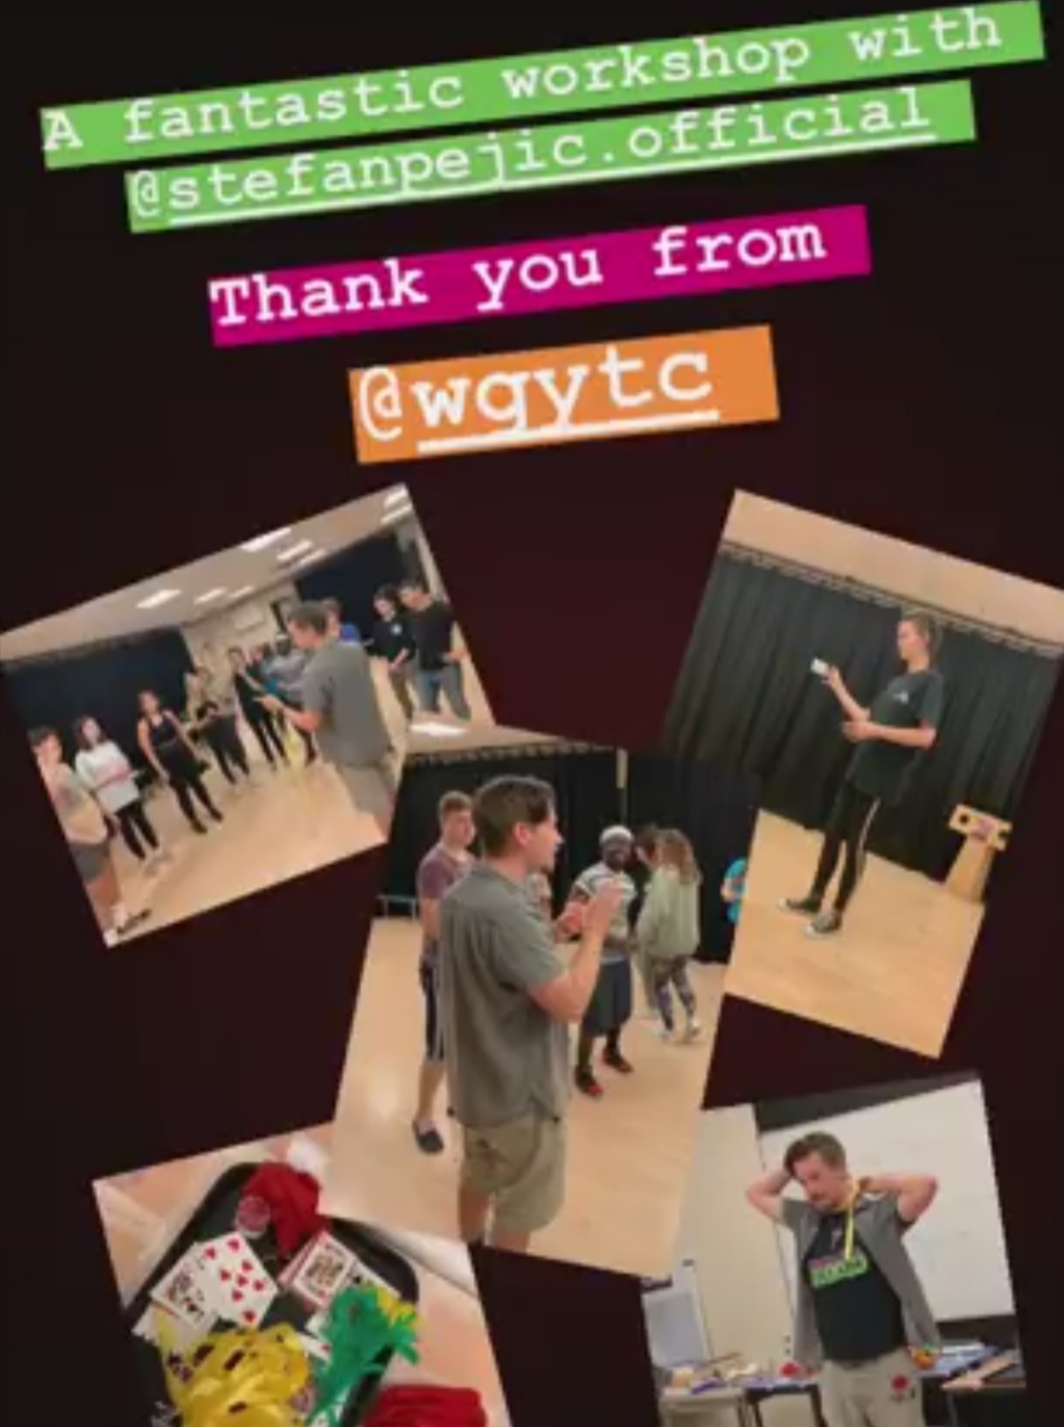 Stefan Pejic was Magic Consultant to West Glamorgan Youth Theatre for their recent production